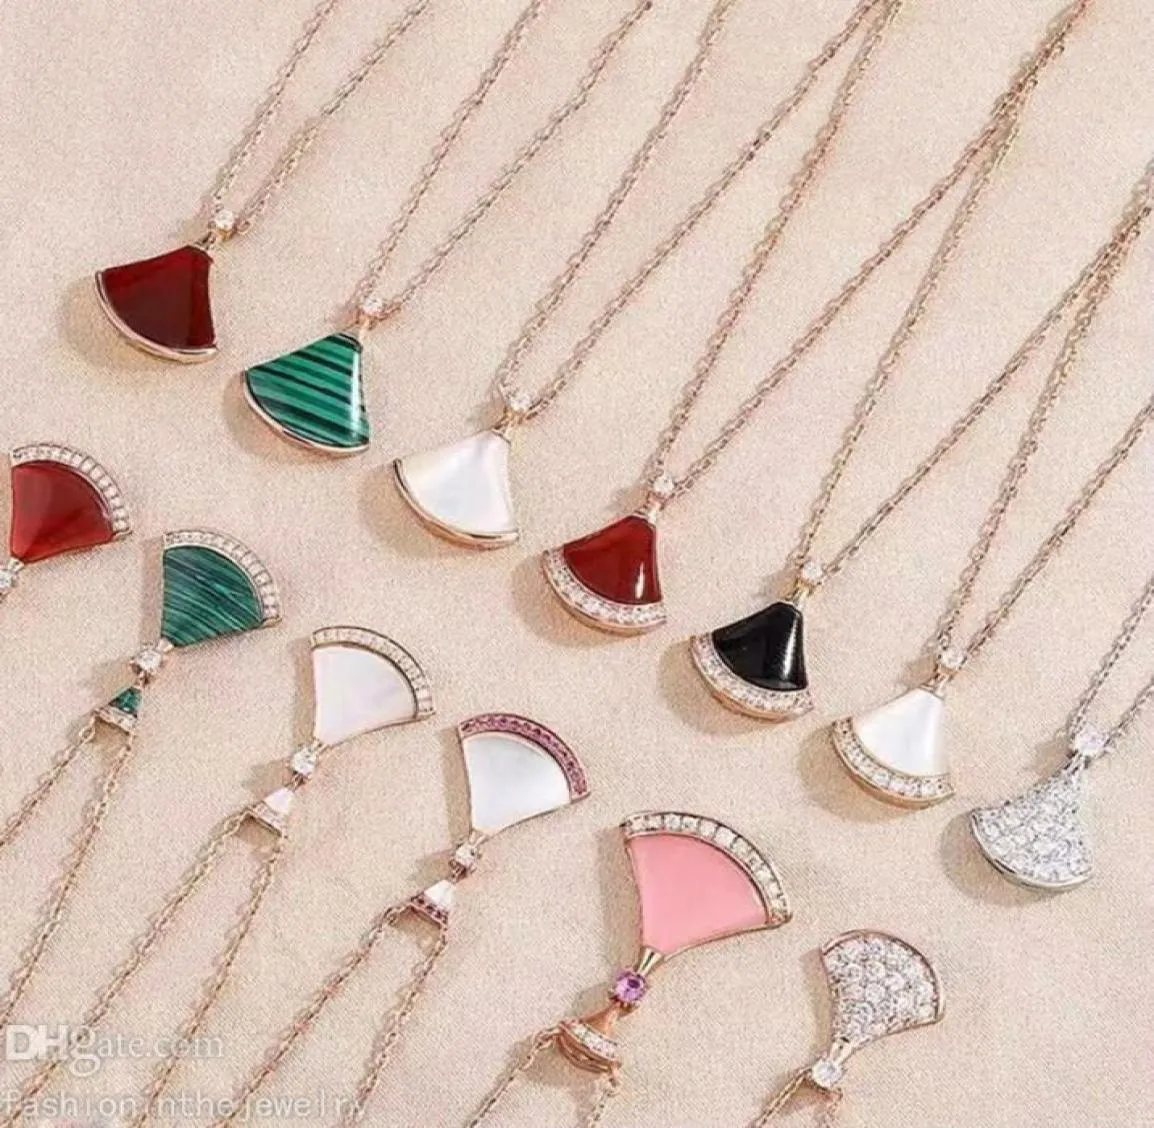 Fanshaped Pendant Necklace Designer Jewelry luxury skirt Necklaces for Women girlfriend rose gold Black white green red pink diam6942027